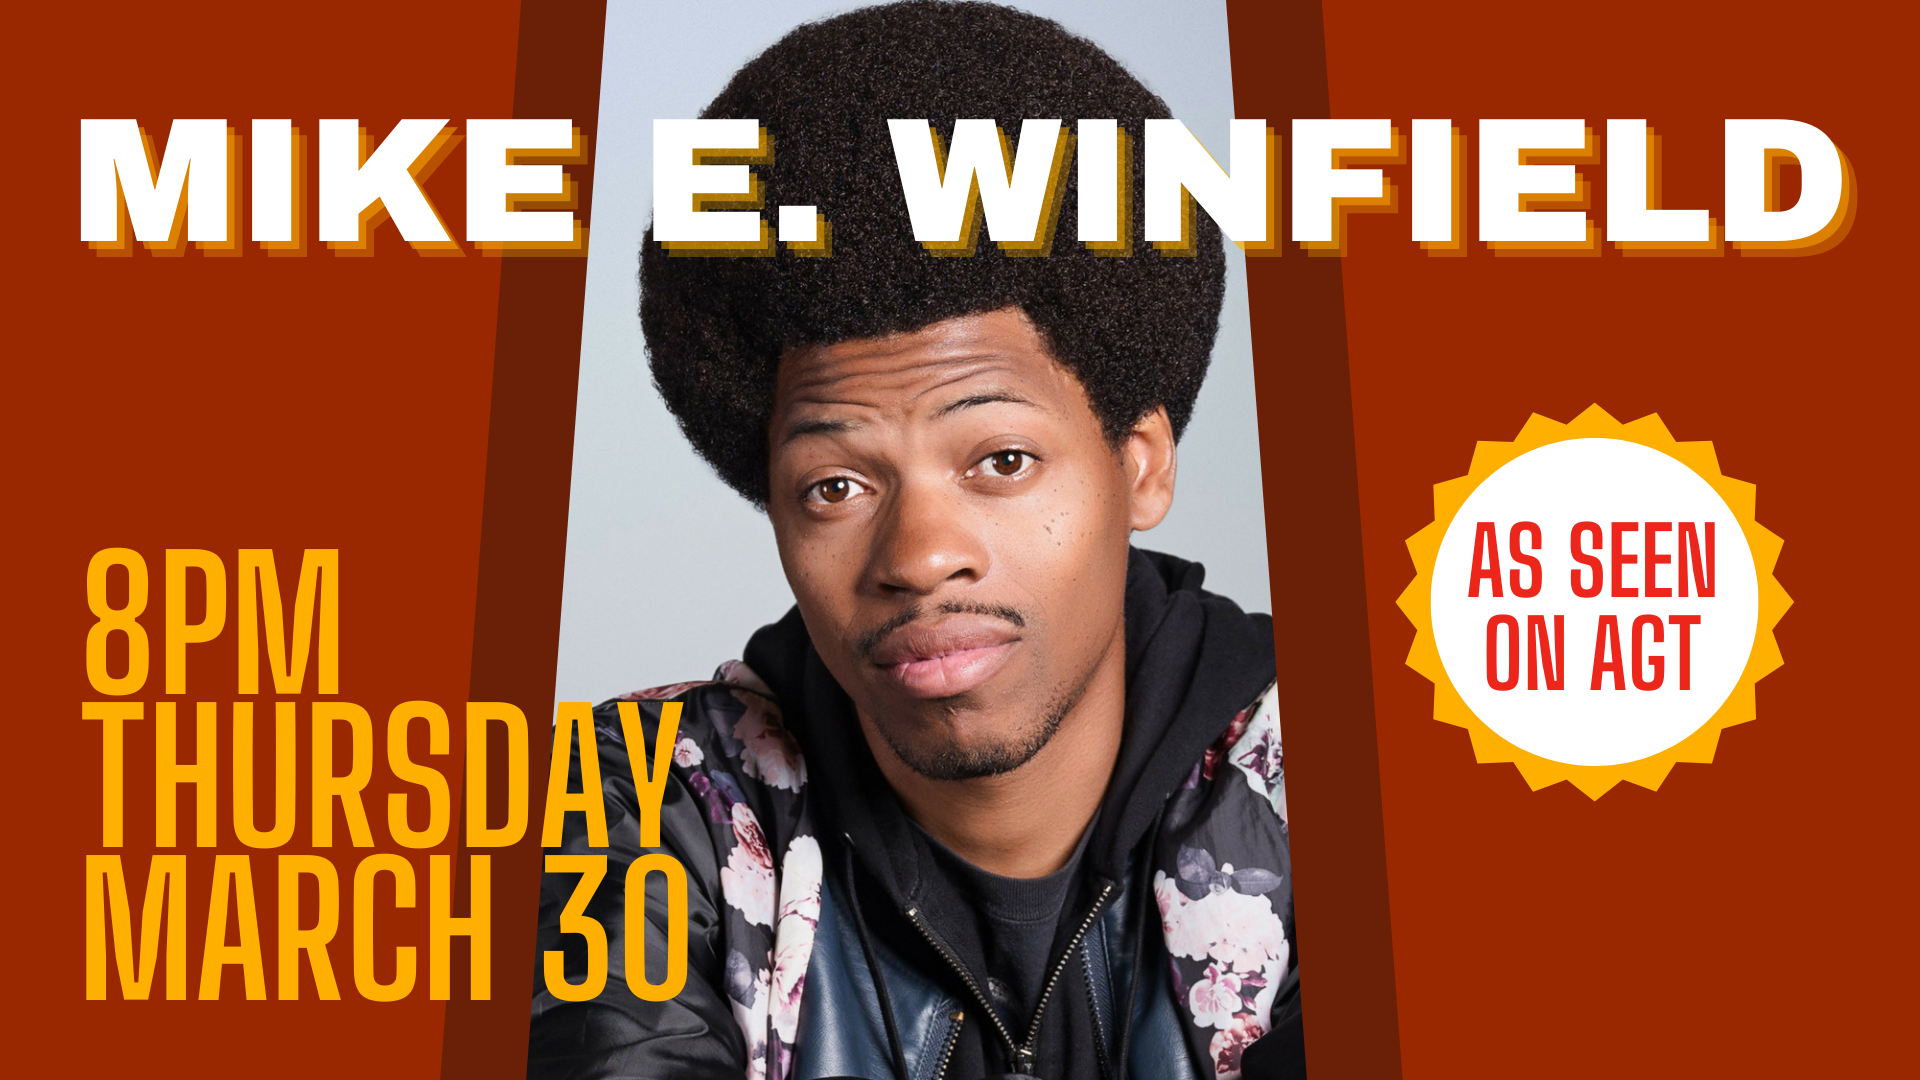 Mike E. Winfield - LIMITED FREE STUDENT TICKETS